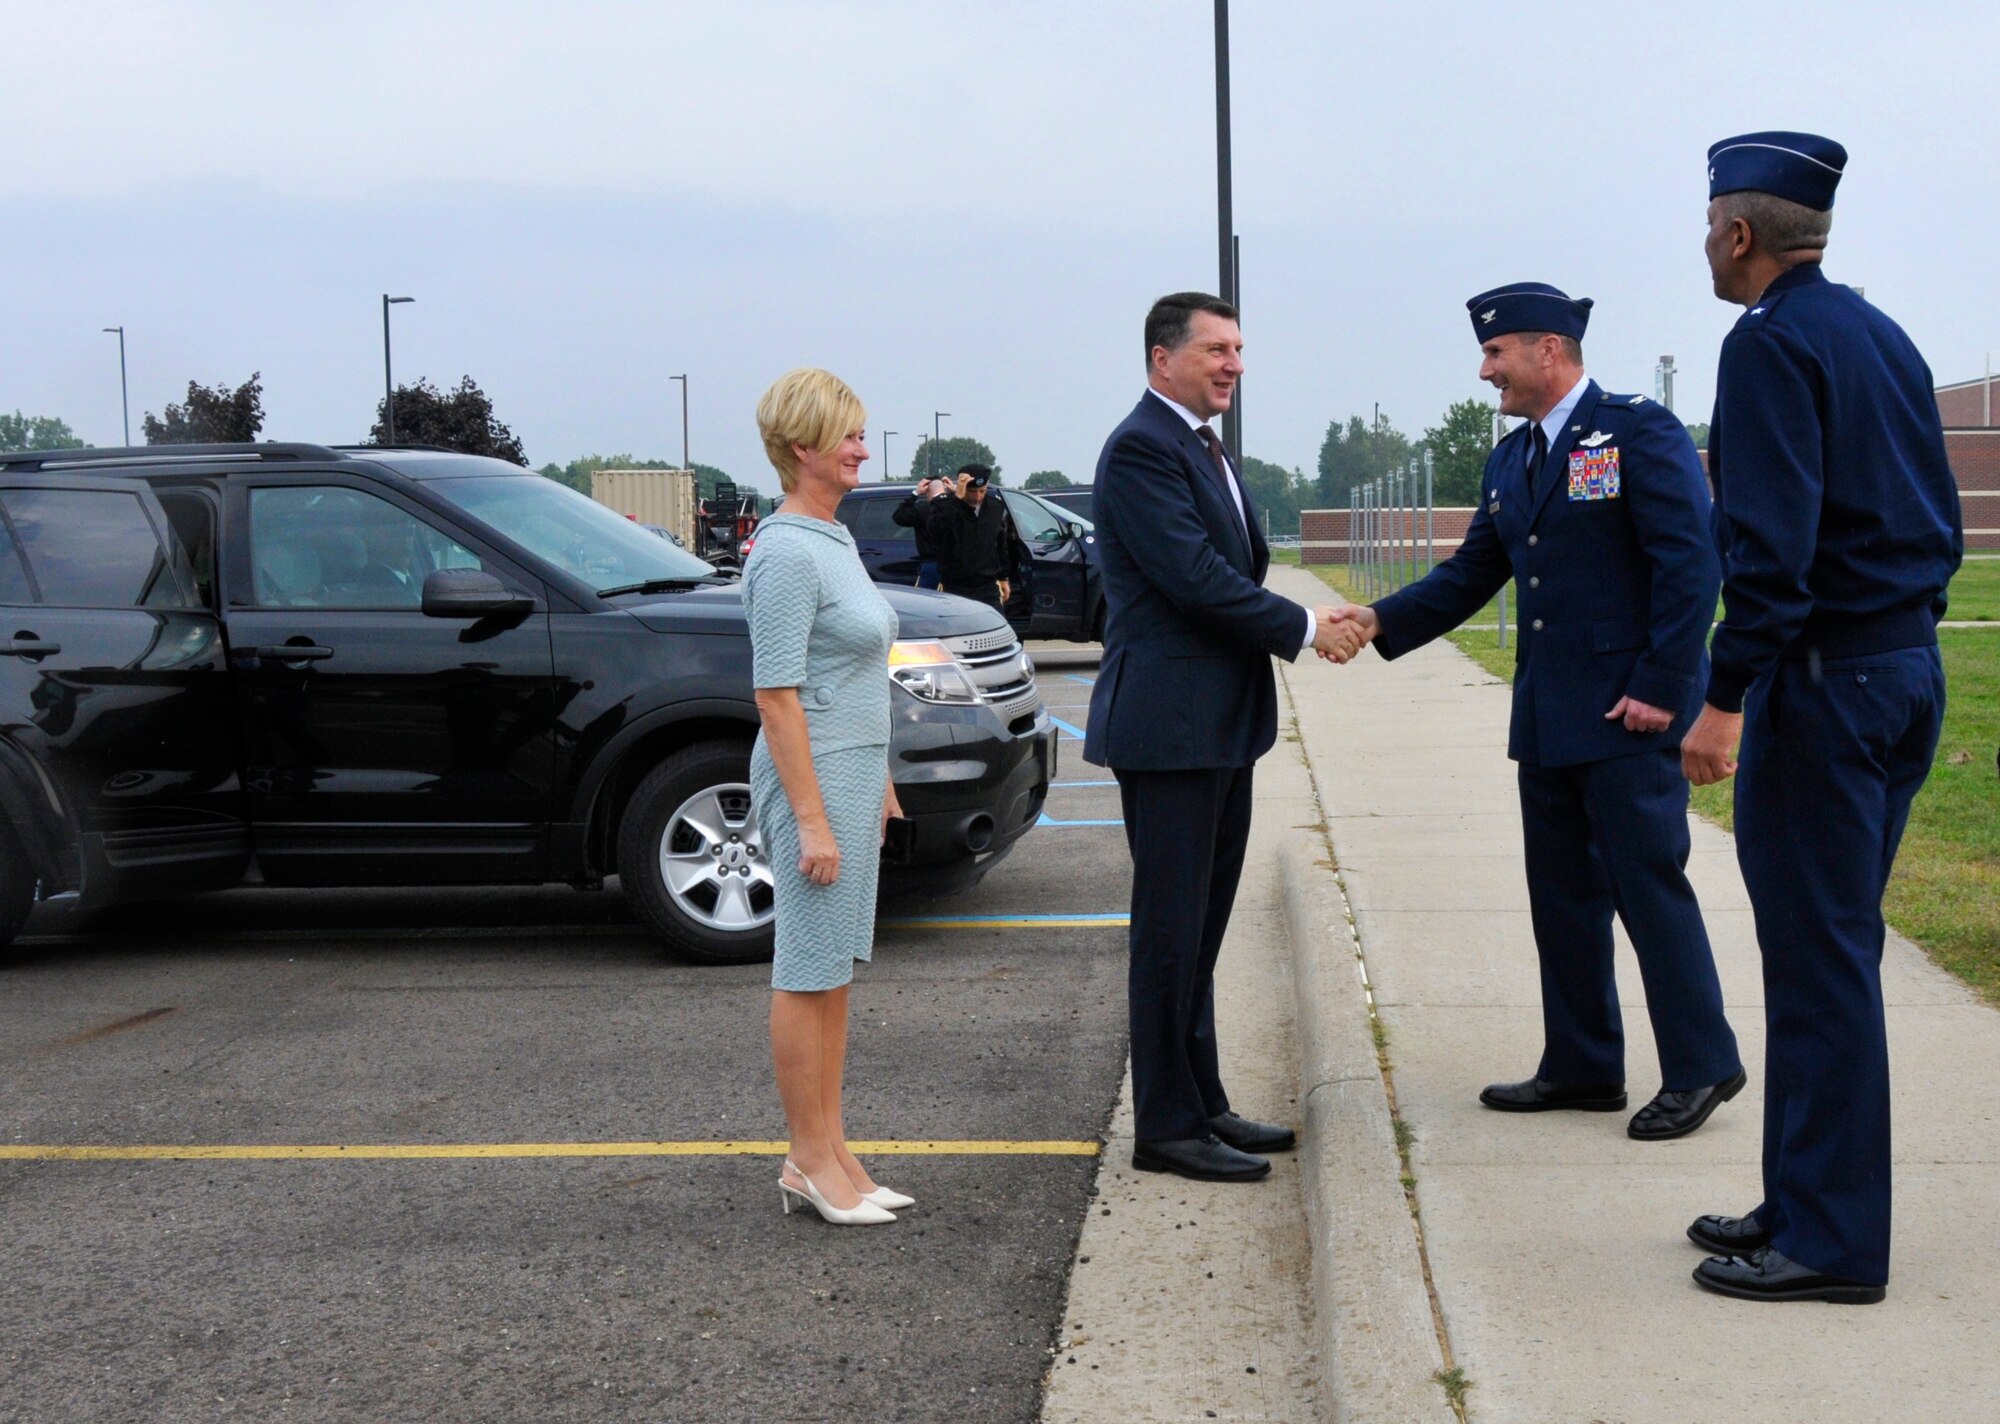 The 110th Attack Wing, Battle Creek Air National Guard Base, Mich. proudly host the President of the Republic of Latvia, Raimonds Vejonis, for a special tour of Wing facilities, Friday, September 23, 2016. Joined by his wife, Iveta, the President’s two-hour visit included a briefing at the 217th Air Operations Group which highlighted the 110th Attack Wing’s mission capabilities: Command and Control, Cyber Operations, Agile Combat Support, and the MQ-9 Reaper program. President Vejonis’s visit to the 110th Attack Wing celebrated the highly-successful State Partnership between Latvia and the Michigan Air National Guard. The U.S. Department of Defense established the State Partnership Program in 1993 to promote stability, enhance military capability, improve interoperability and enhance the principles of responsible governance among struggling Baltic Nations and assigned program management to the National Guard Bureau.(Air National Guard Photo by Master Sgt. Sonia Pawloski/released)